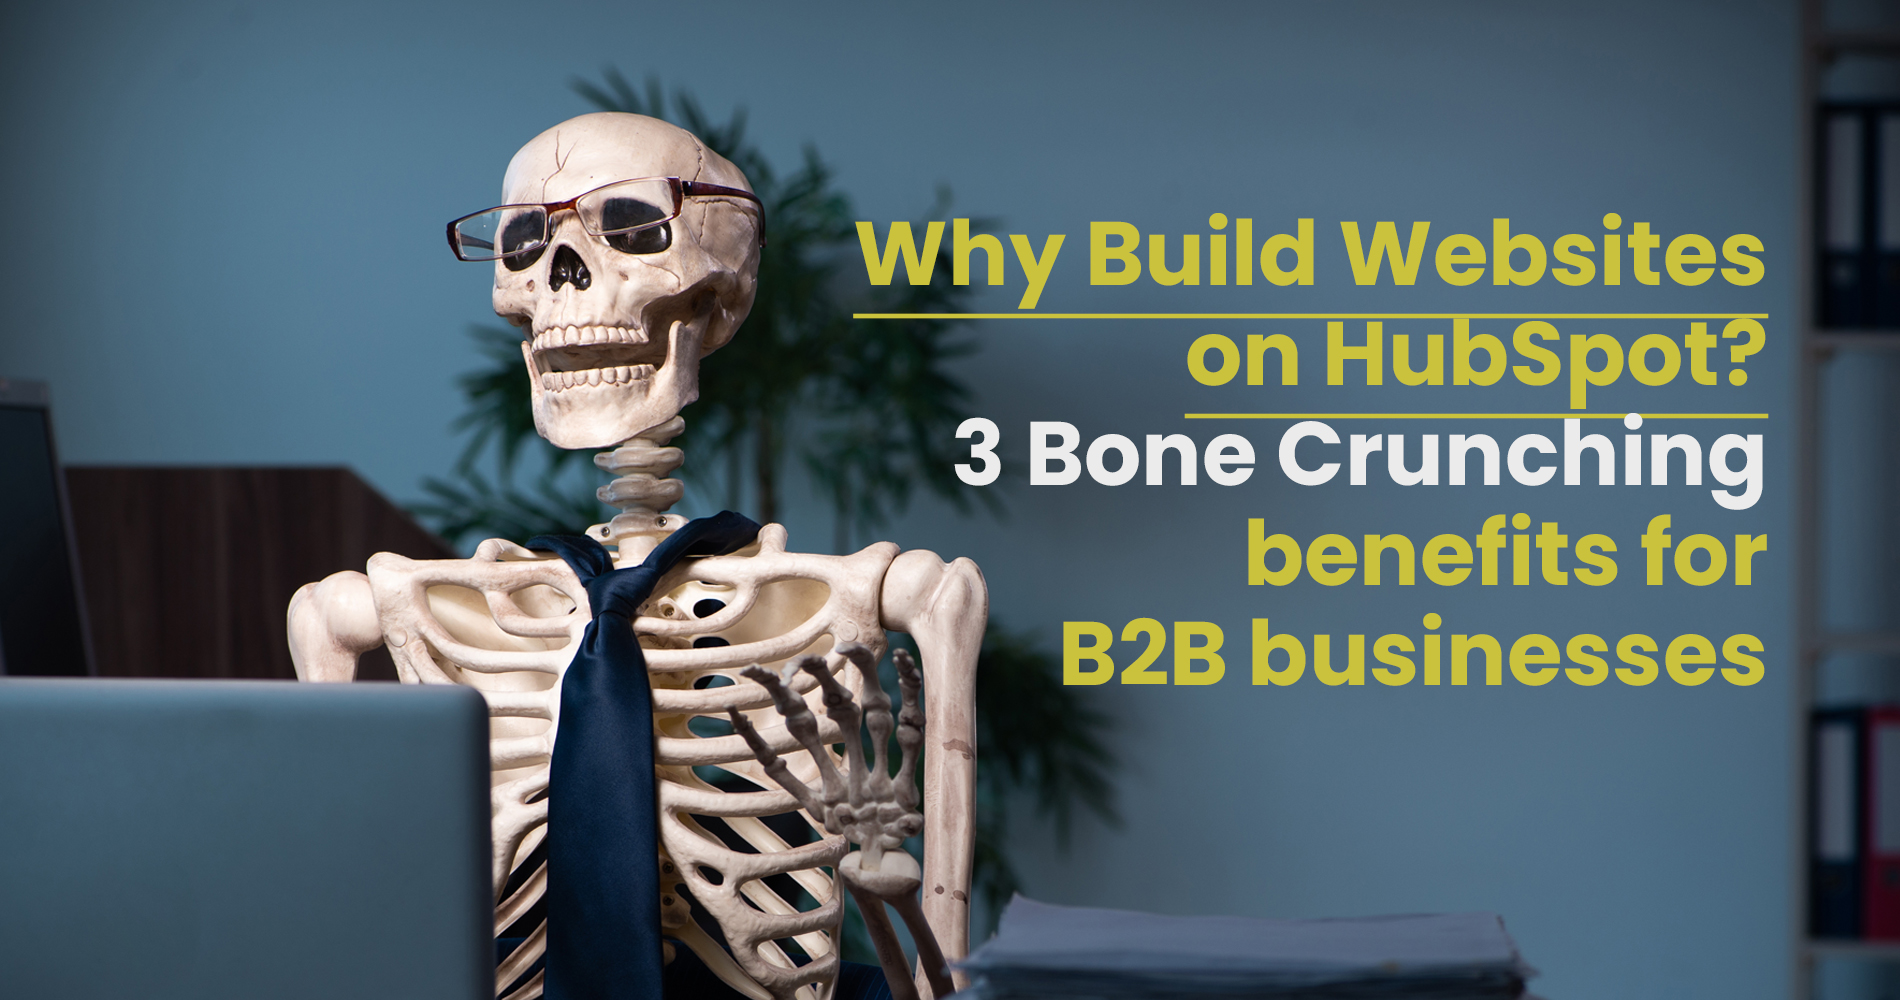 Why Build Websites on HubSpot: 3 Bone Crunching benefits for B2B businesses